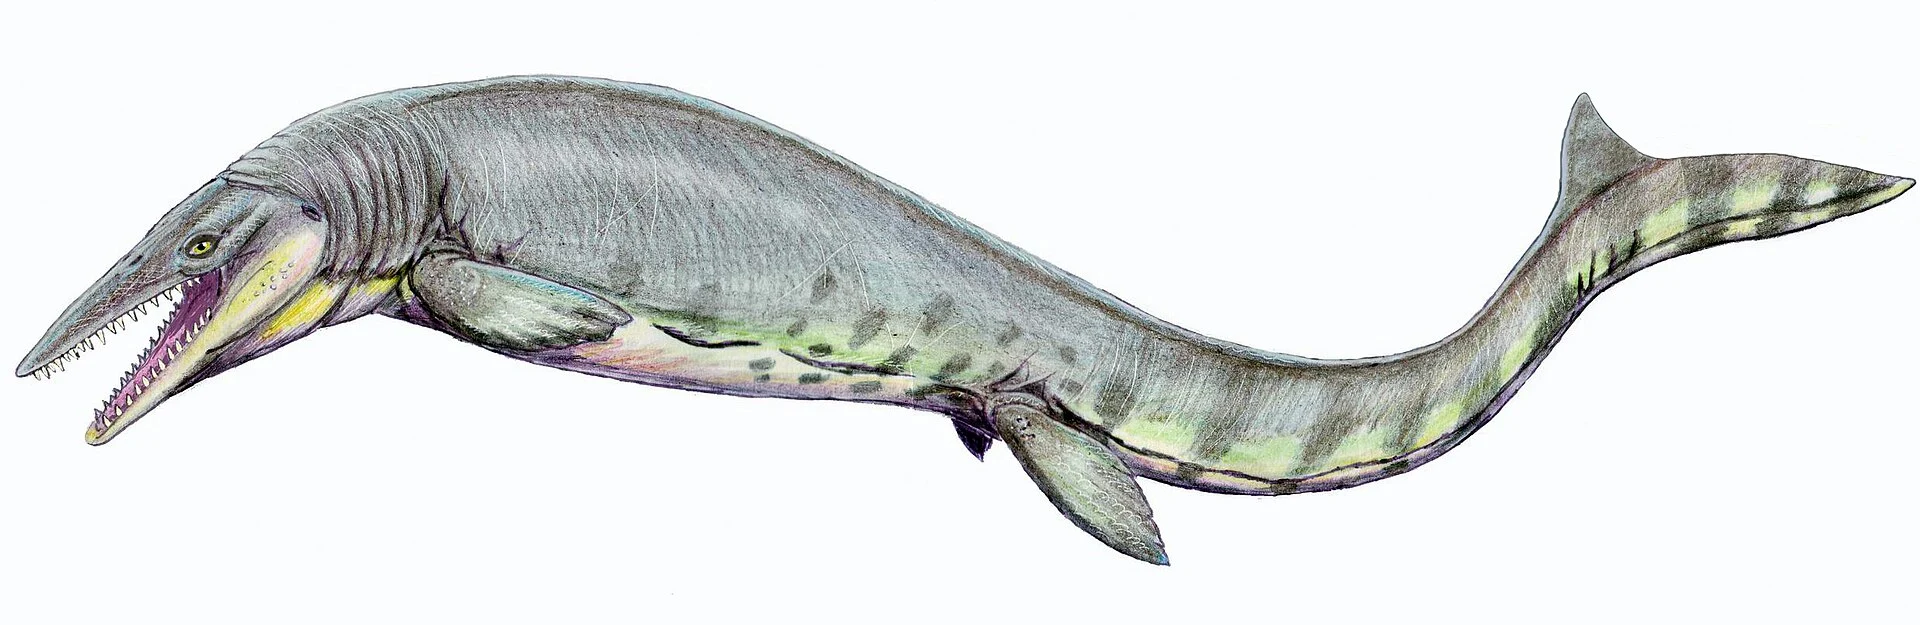 This is a picture which is an artistic rendition of what a Tylosaurus looked like when it was alive.